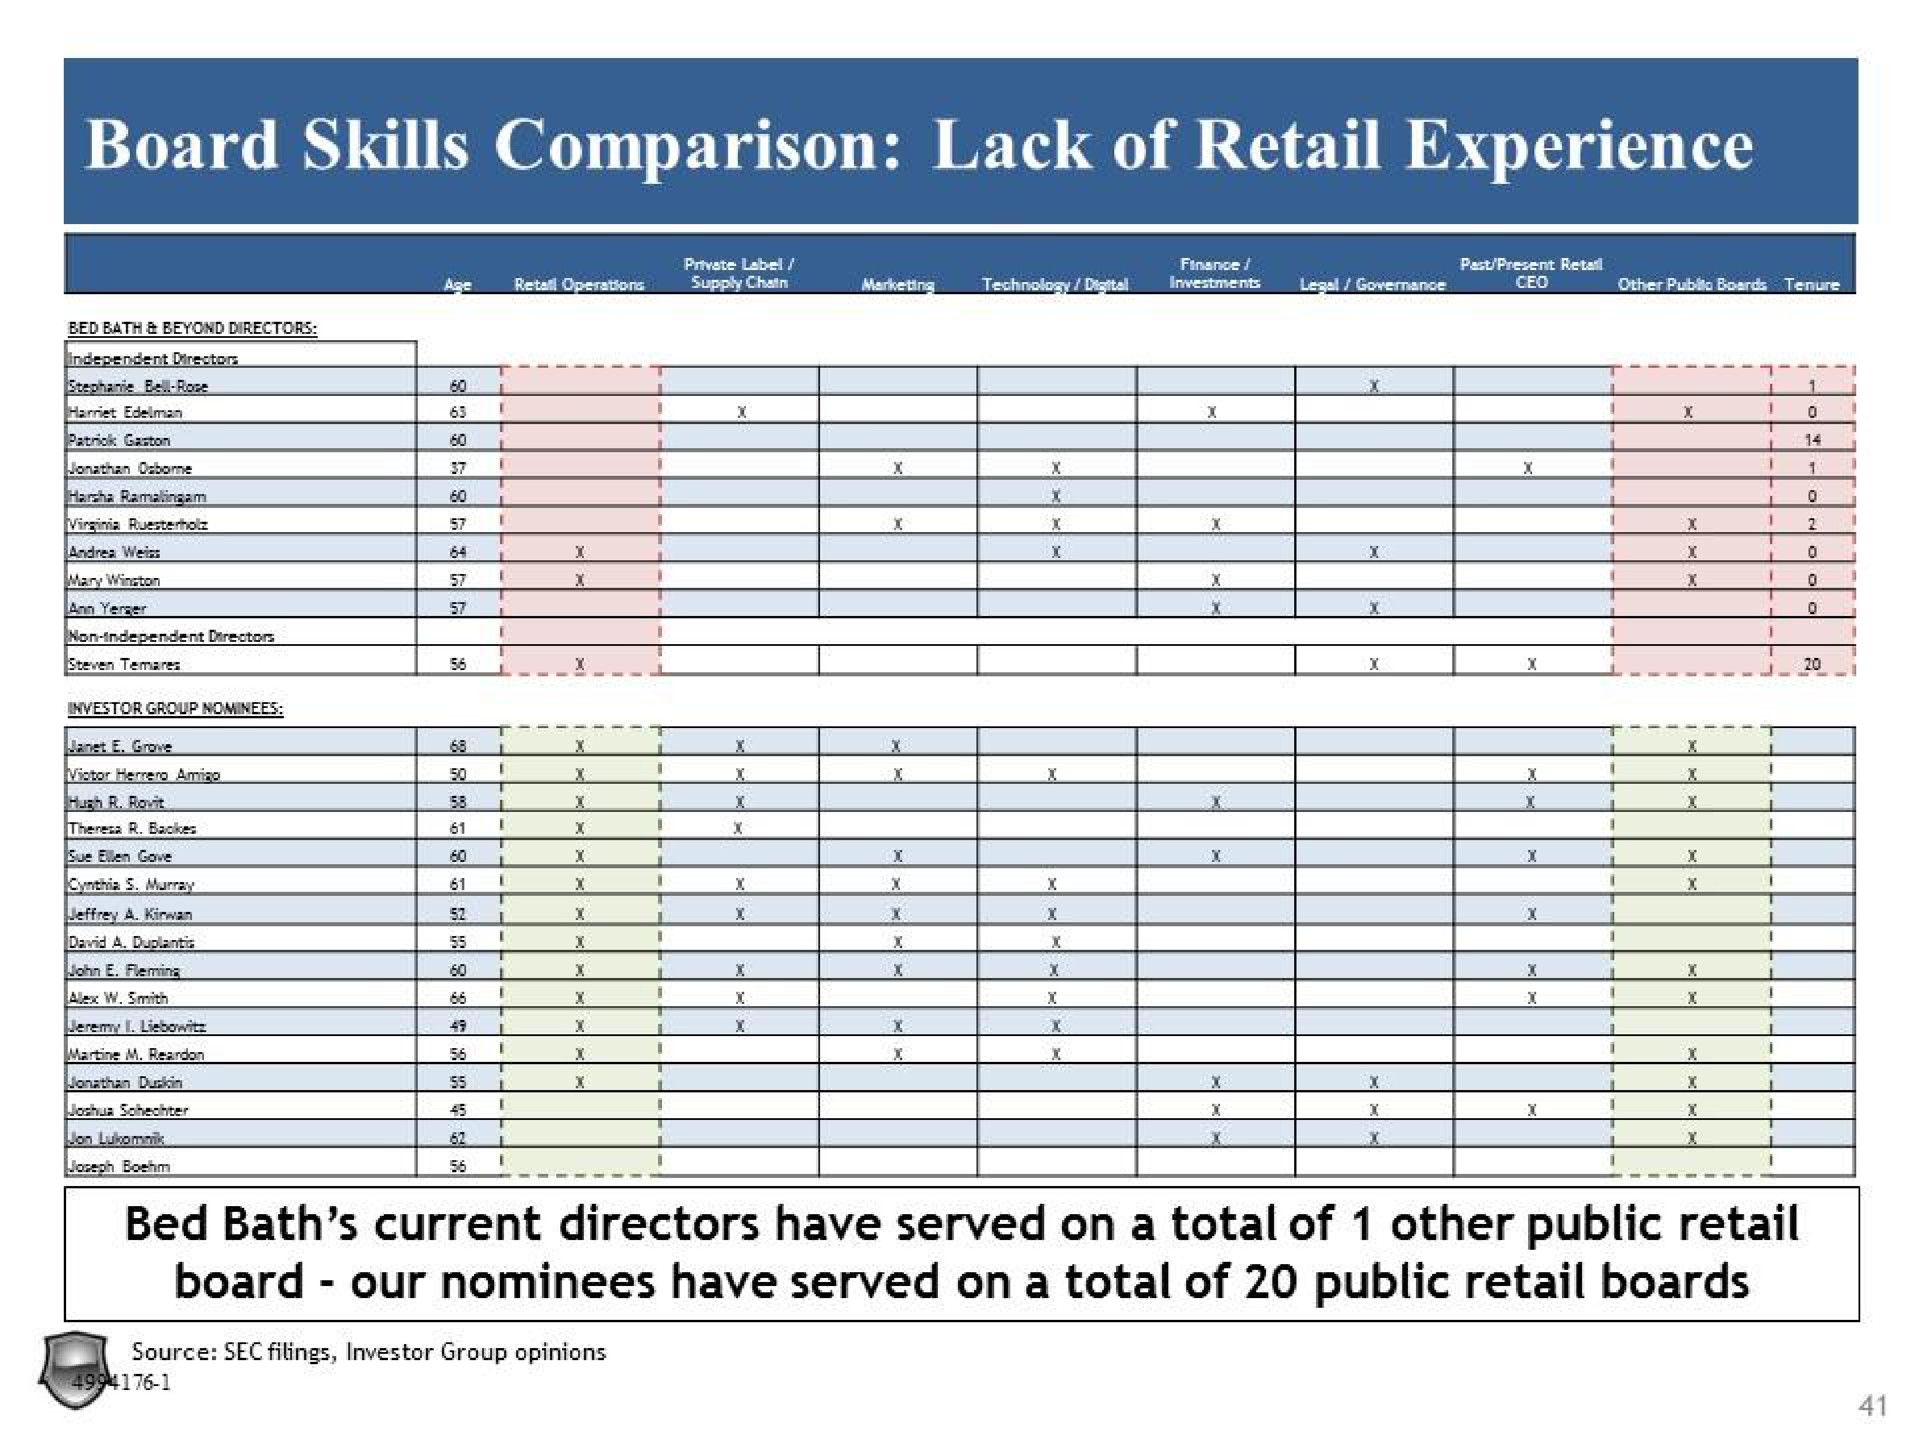 board skills comparison lack of retail experience board our nominees have served on a total of public retail boards bed bath current directors have served on a total of other public retail | Legion Partners